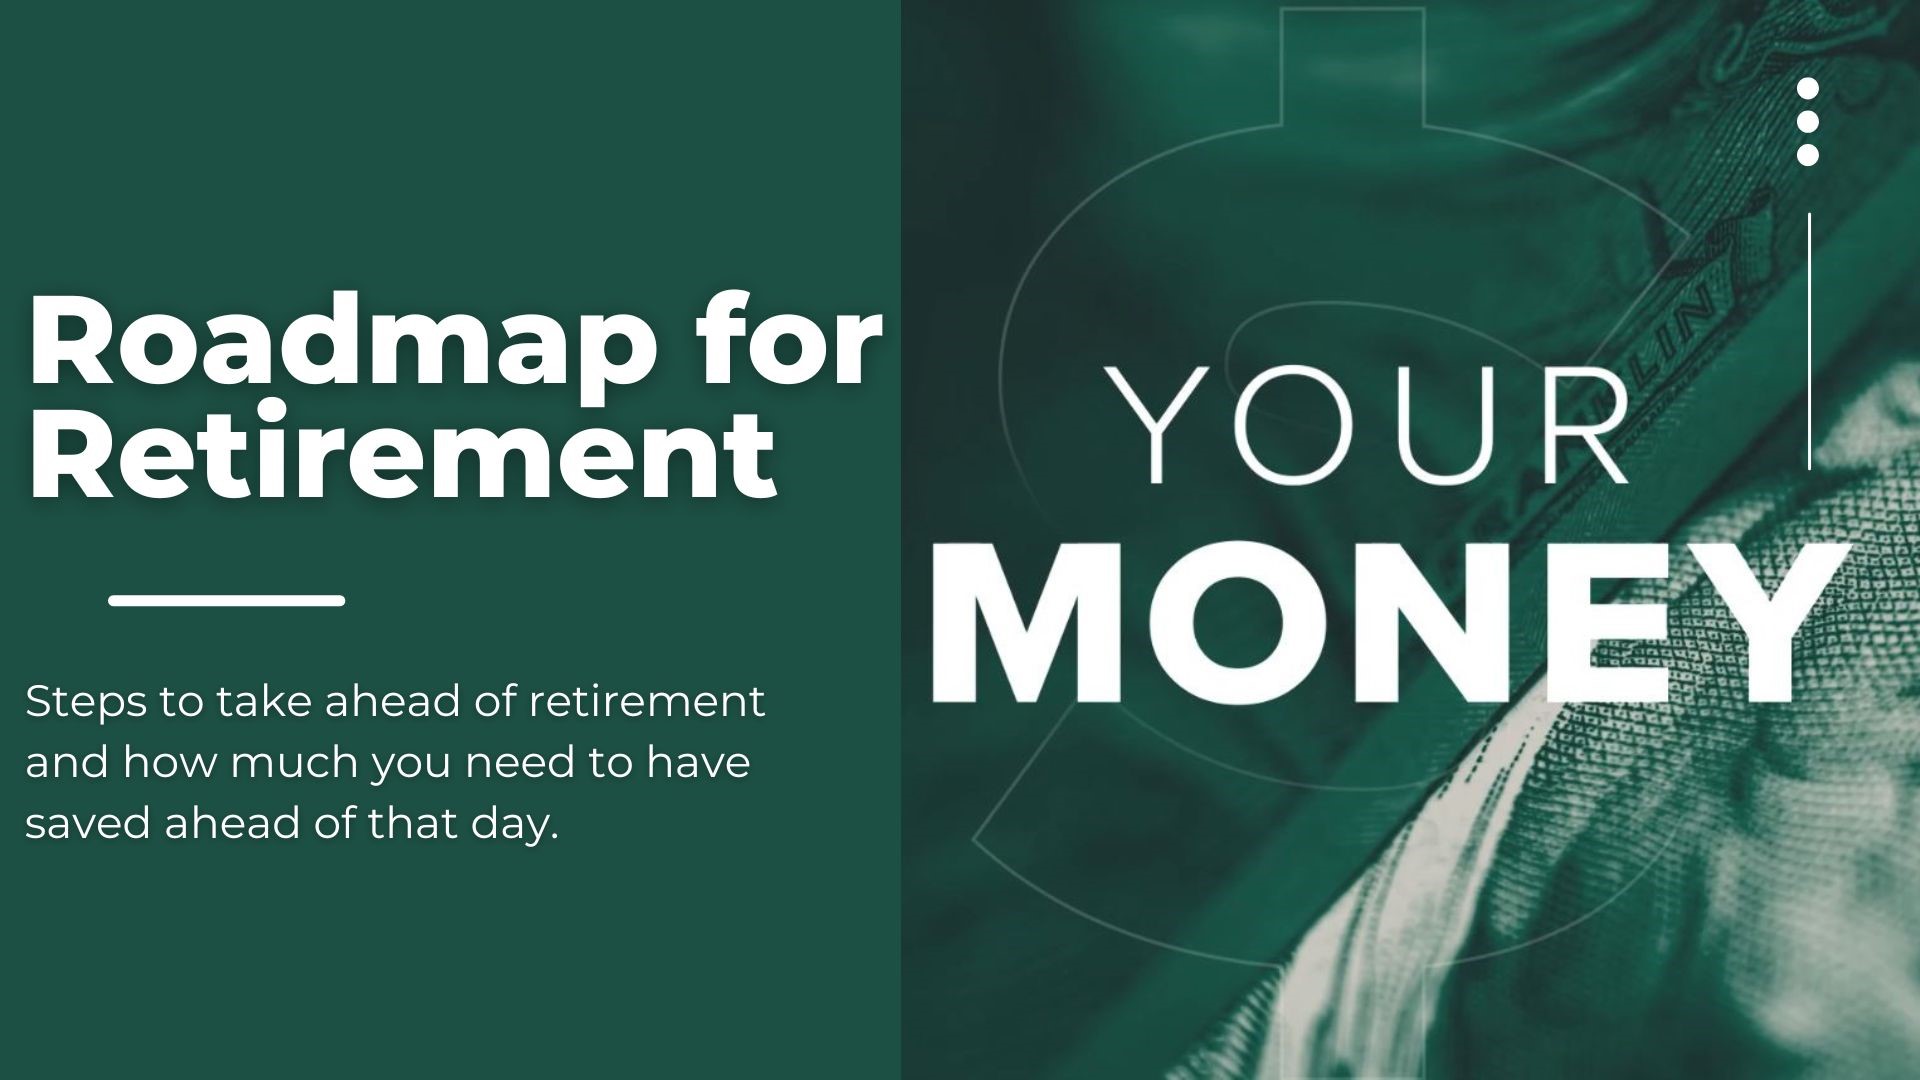 Steps you should take before retirement as well as advice on how much you should have saved and the best ways to prepare now.